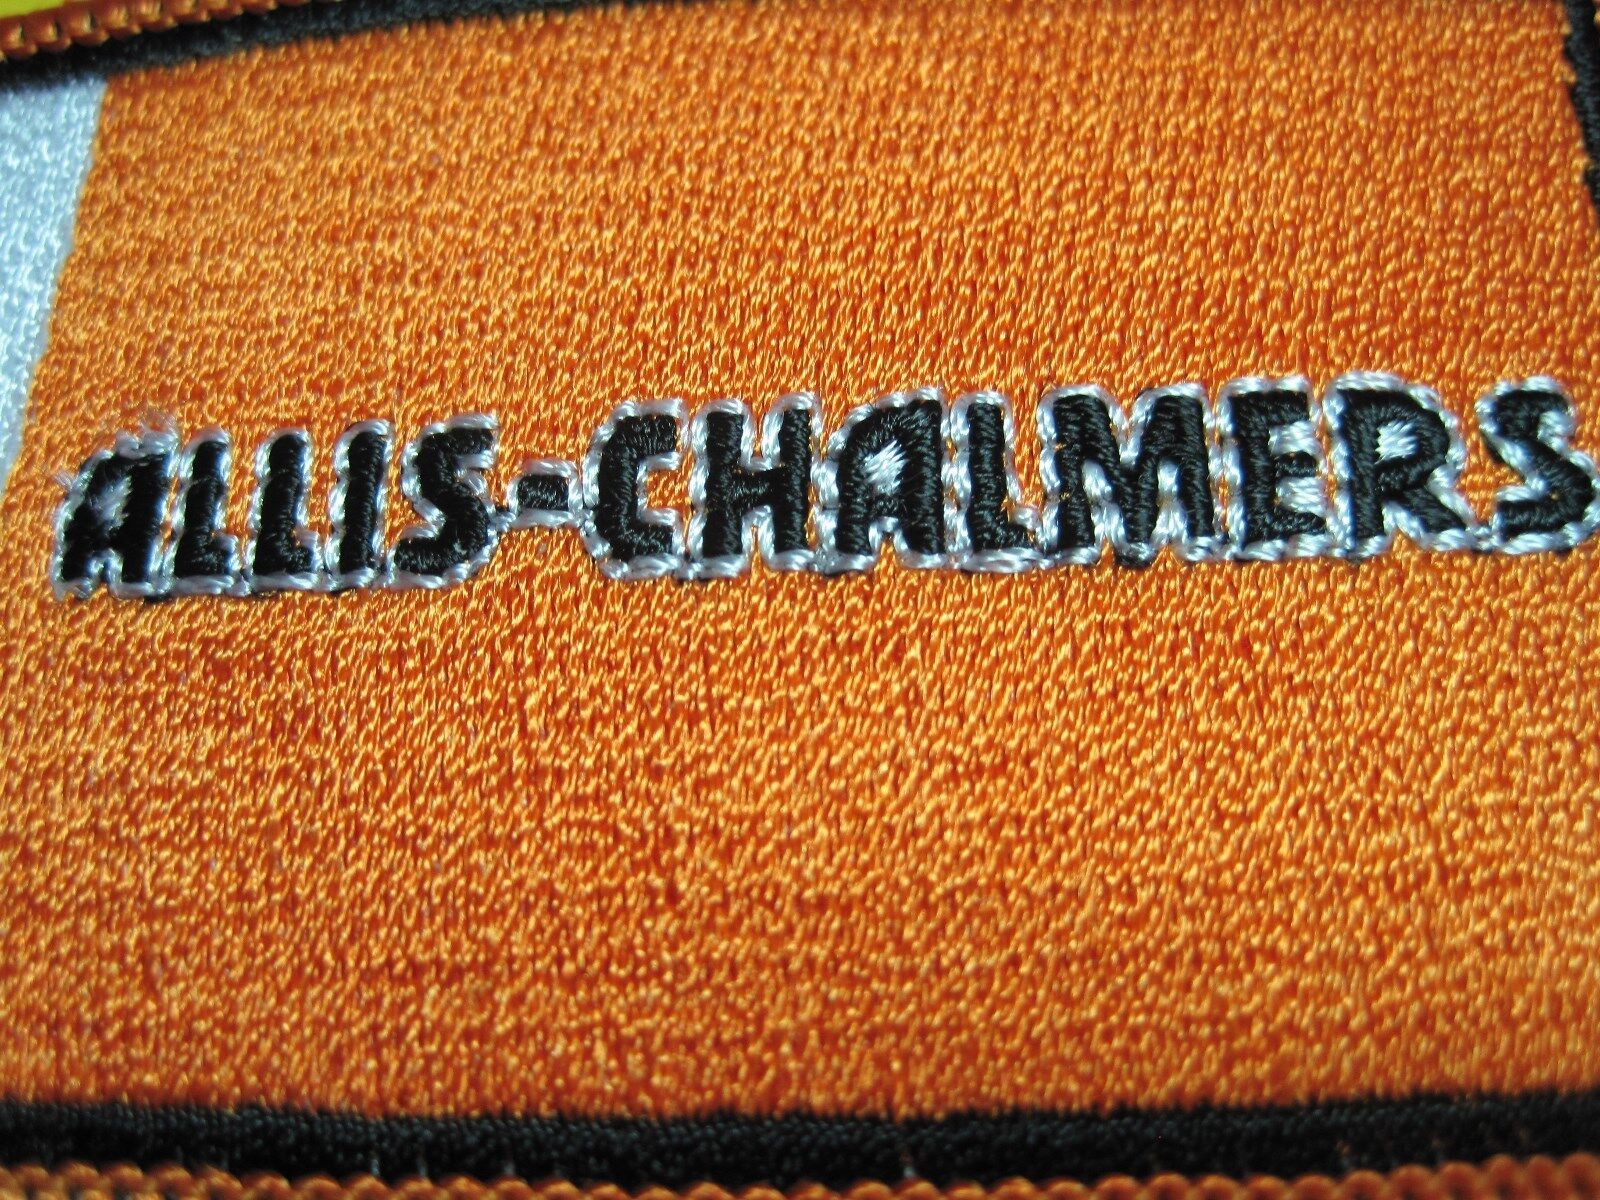 FARM TRACTOR PATCH ALLIS-CHALMERS TRACTOR LOOK AND BUY NOW FARM AND RANCH GEAR Без бренда - фотография #3